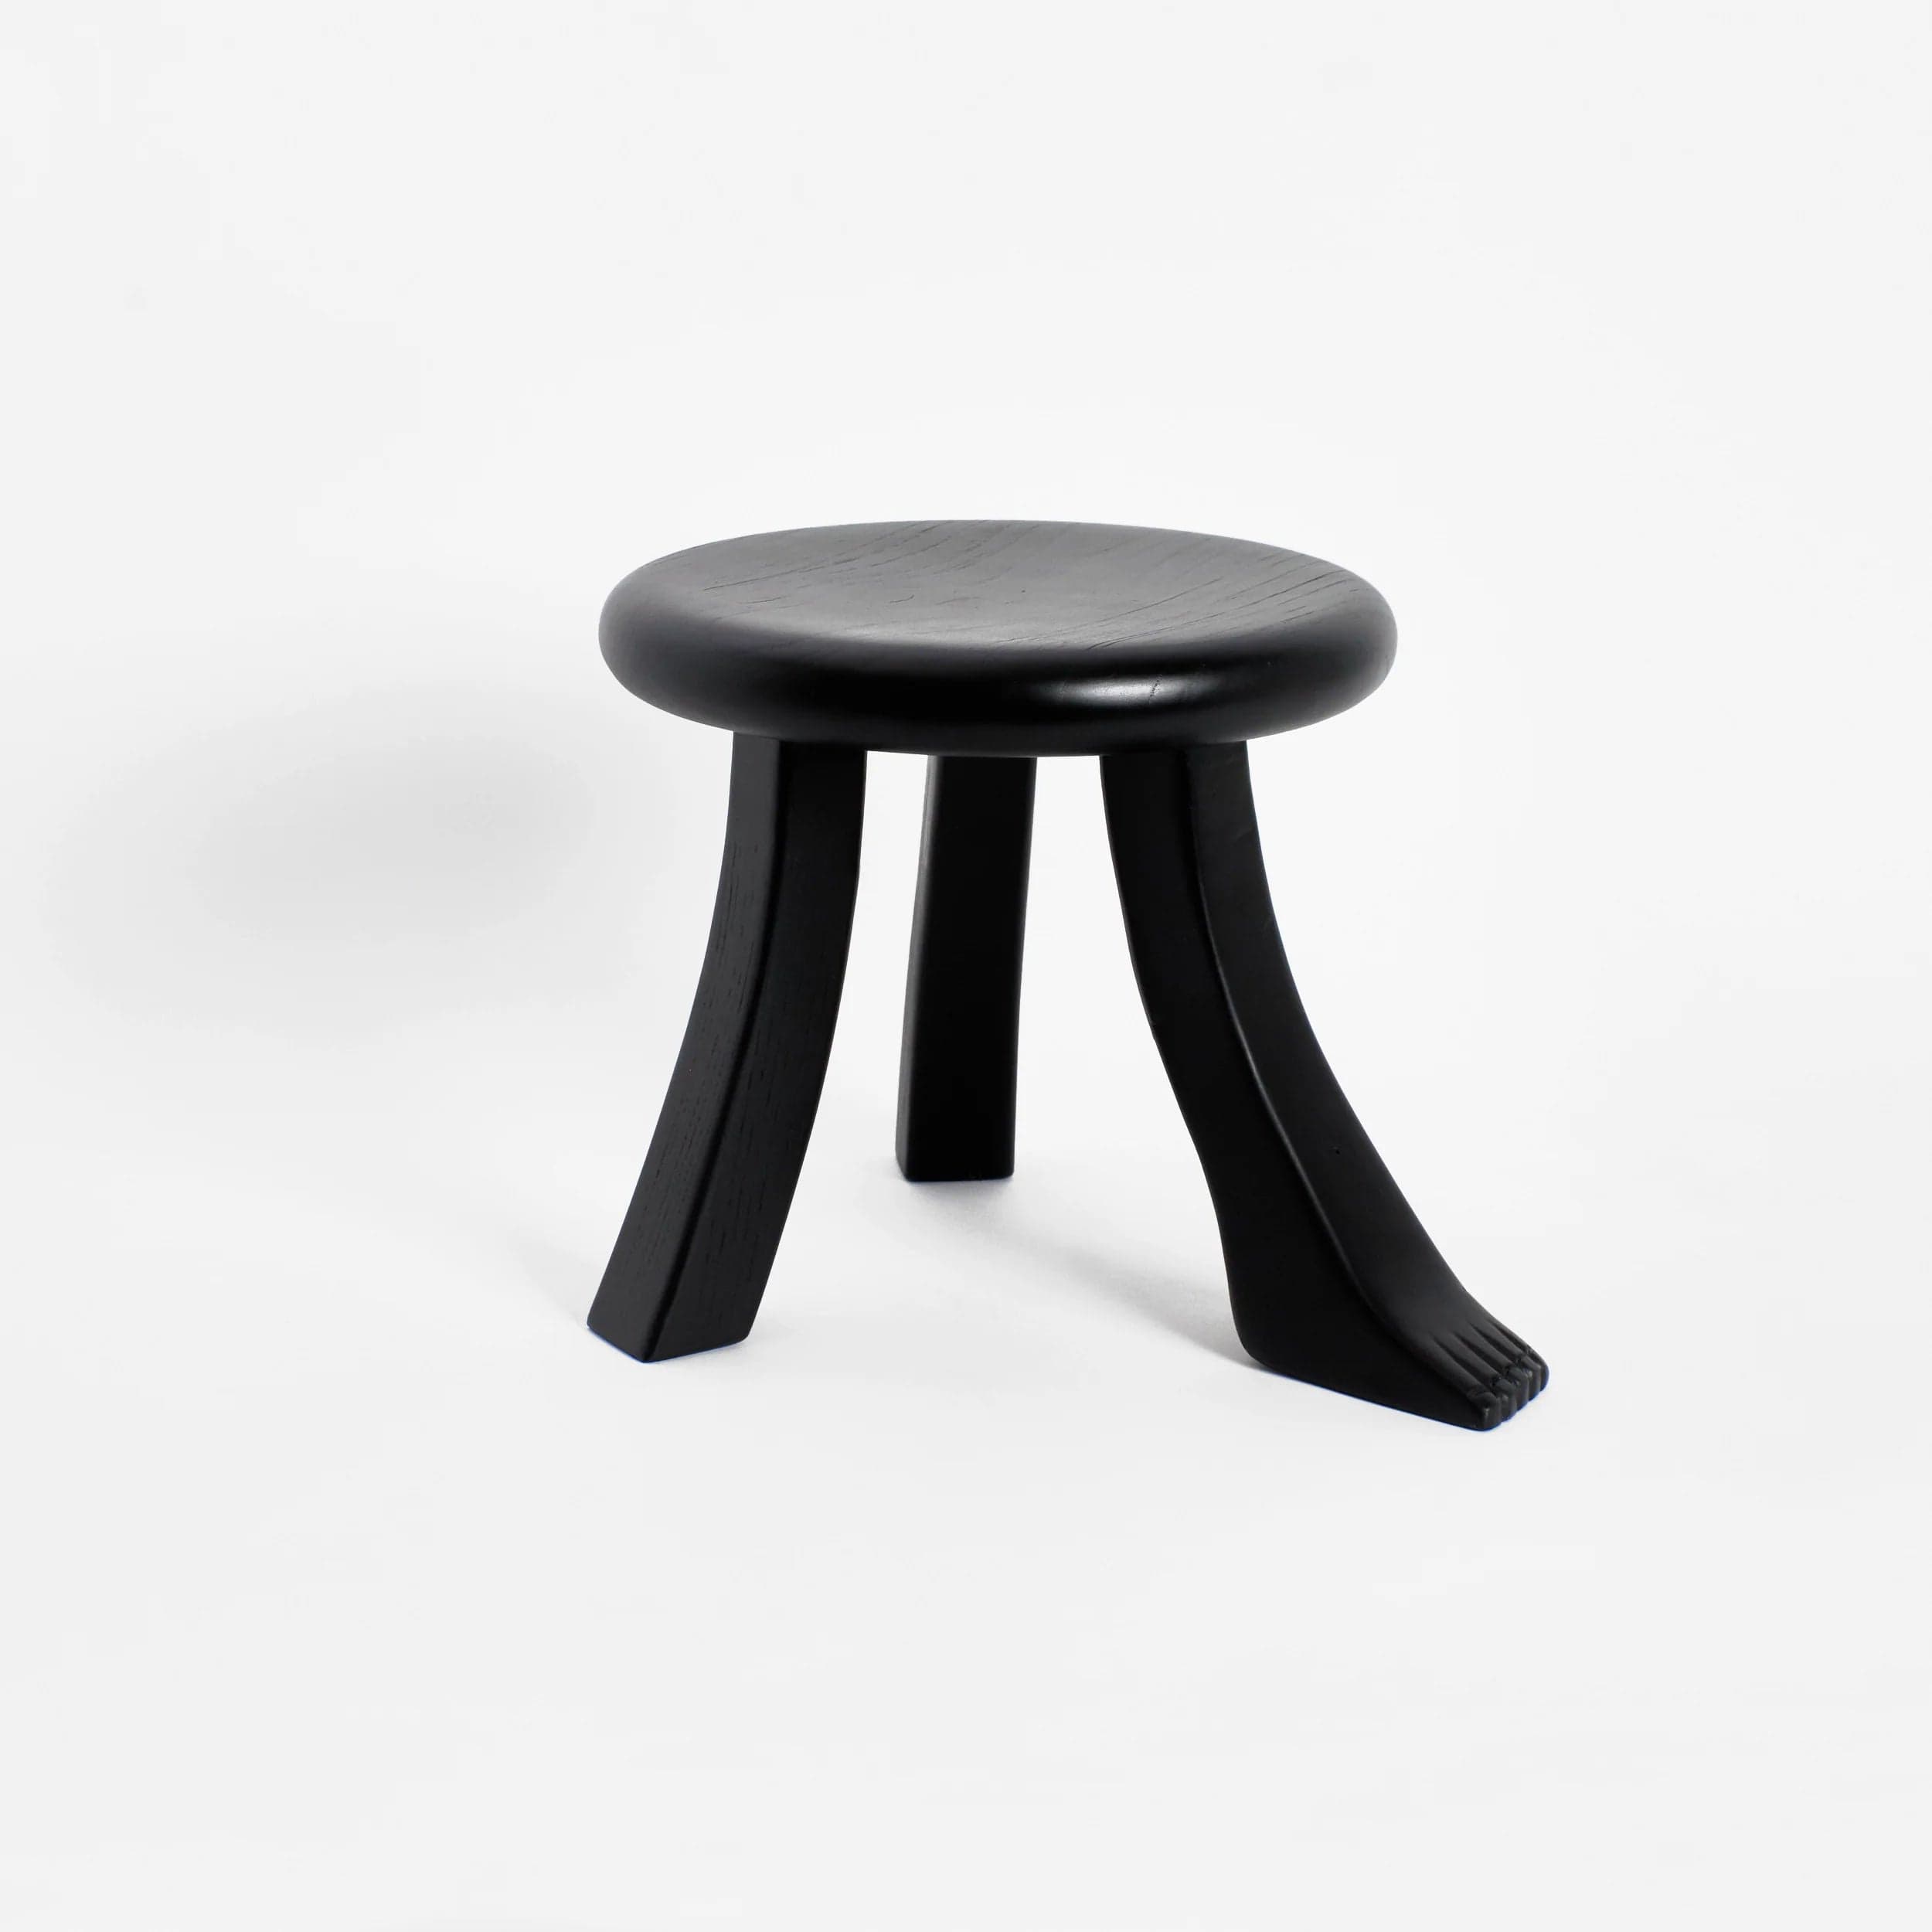 End Tables Foot Stool in Black Chestnut Project 213A